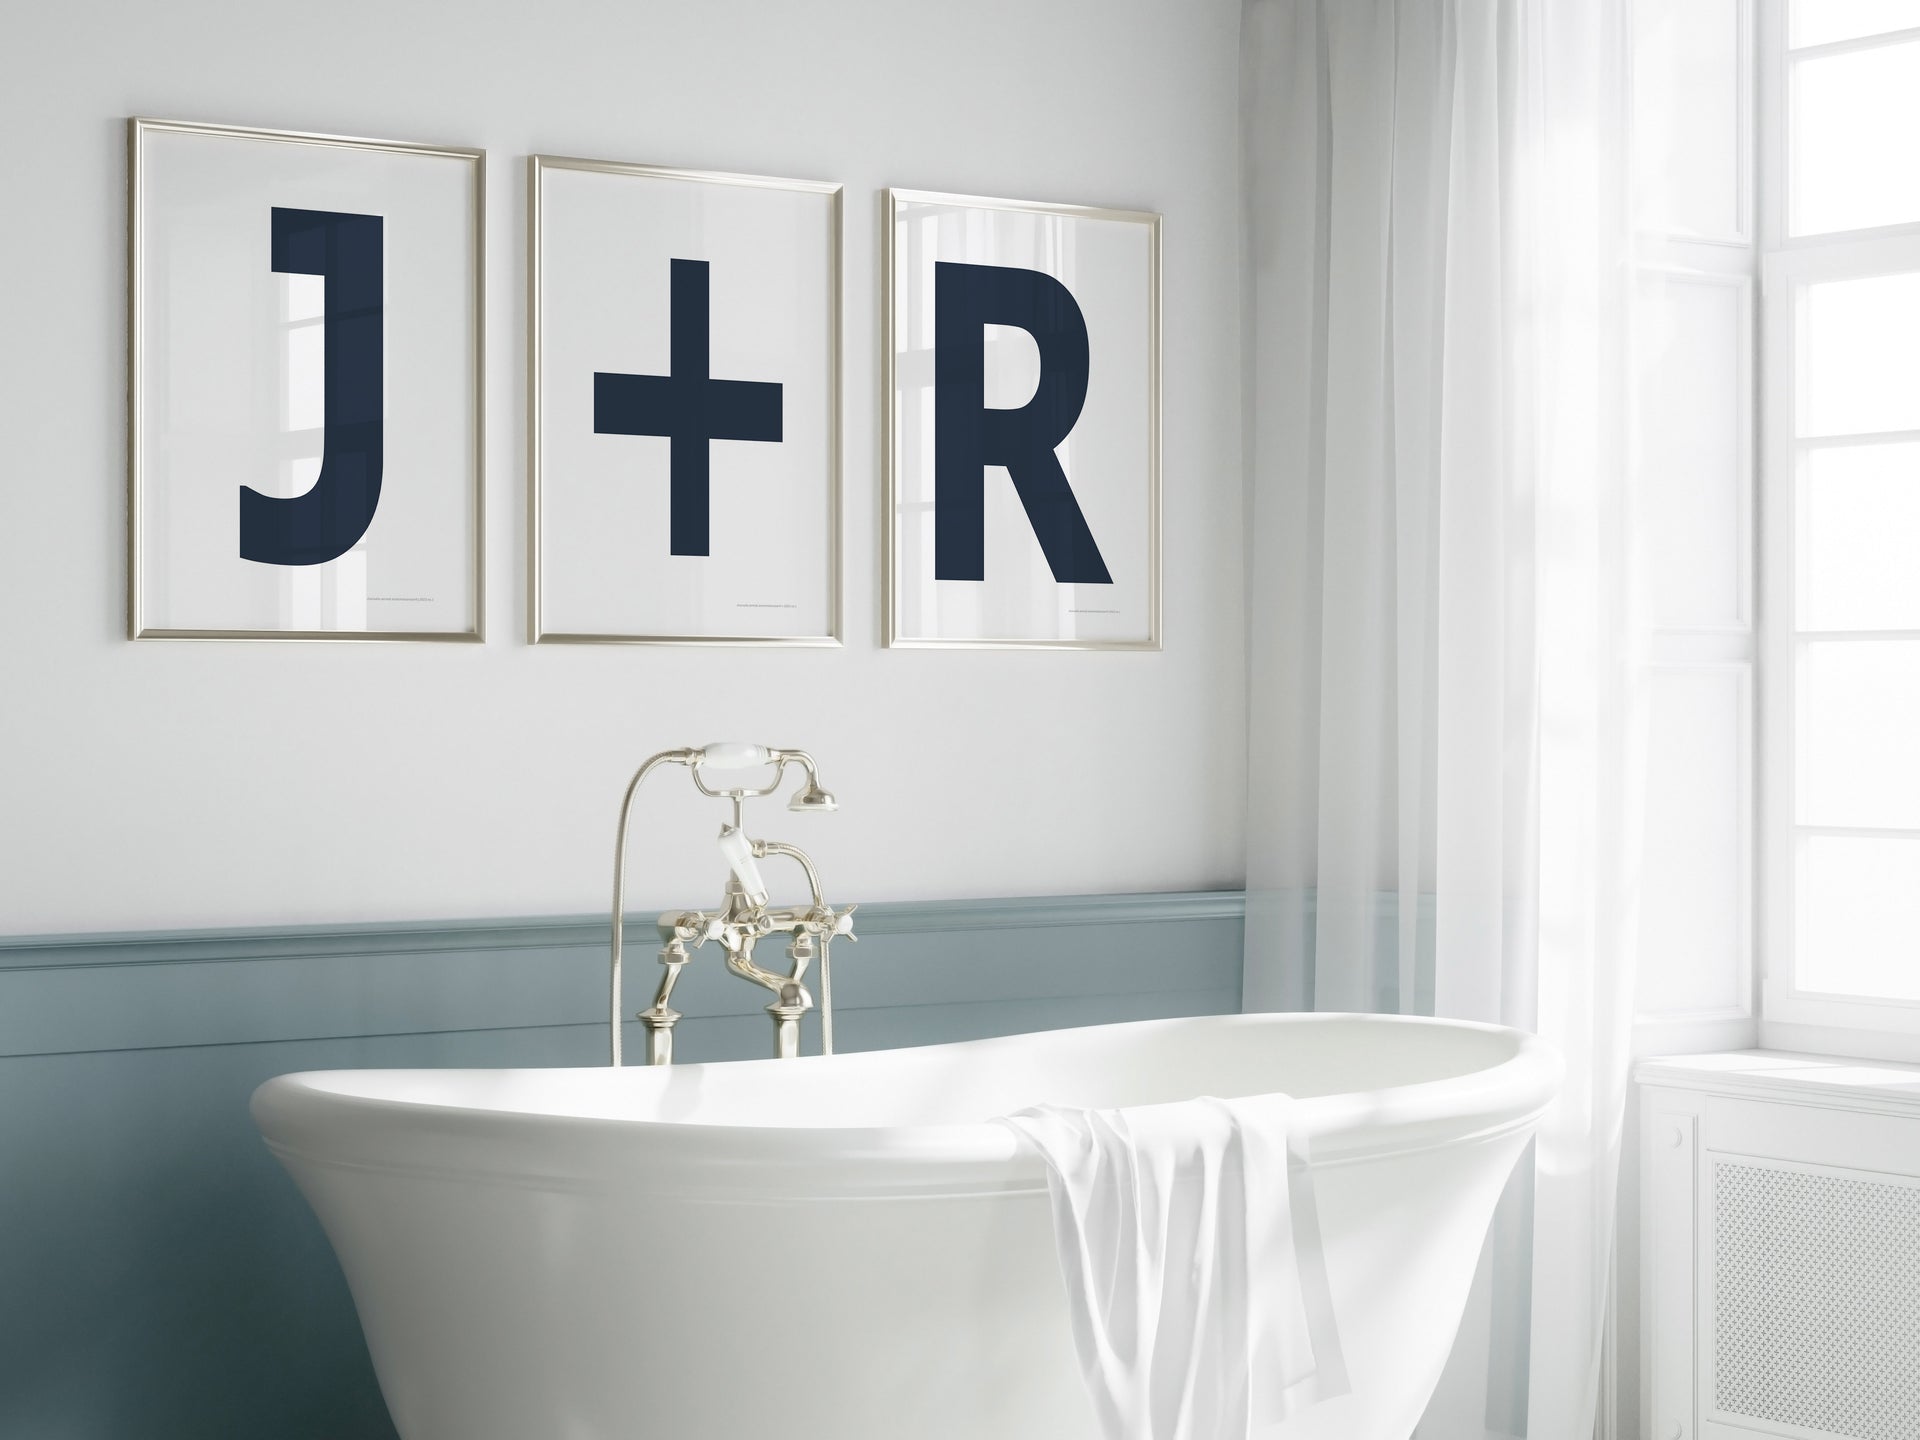 Three framed navy blue and white letter and plus sign art prints spelling out a couple's initials J+R hanging above a bathtub.